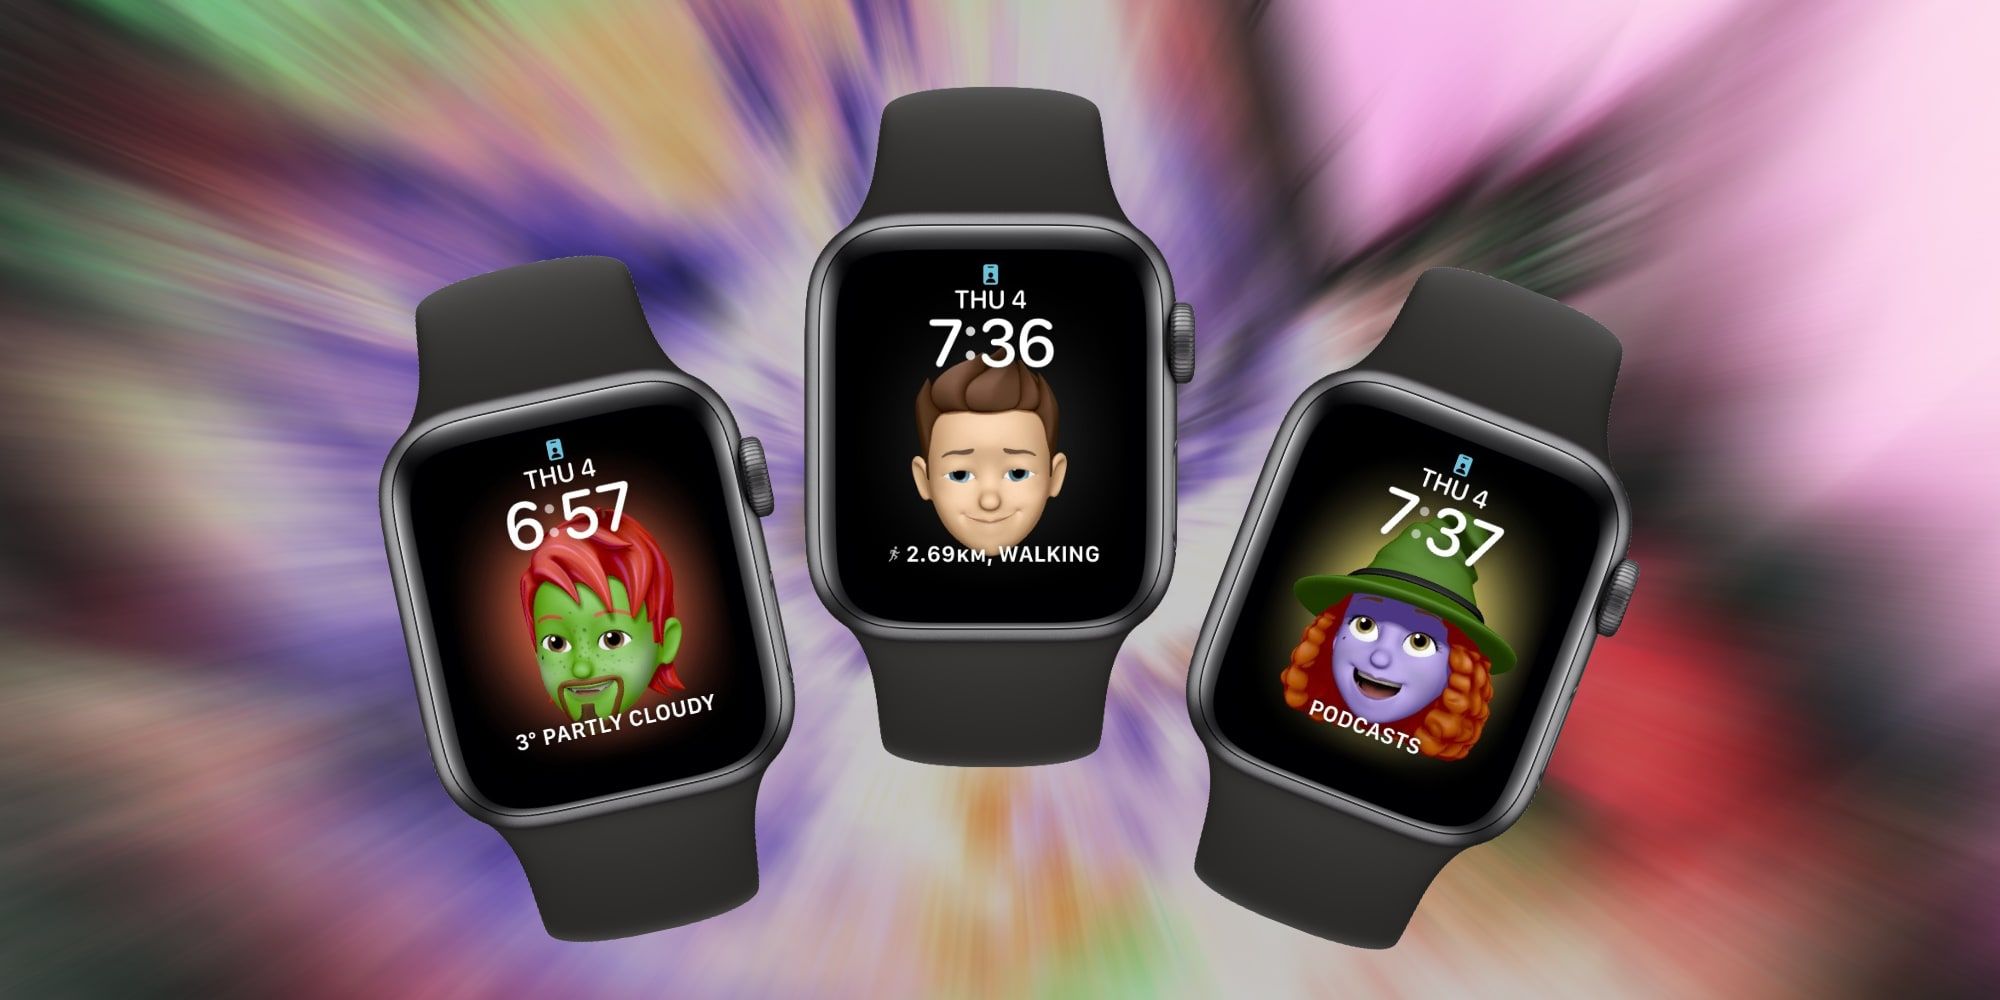 How To Create Memoji For Apple Watch Faces Or Use Them In Messages